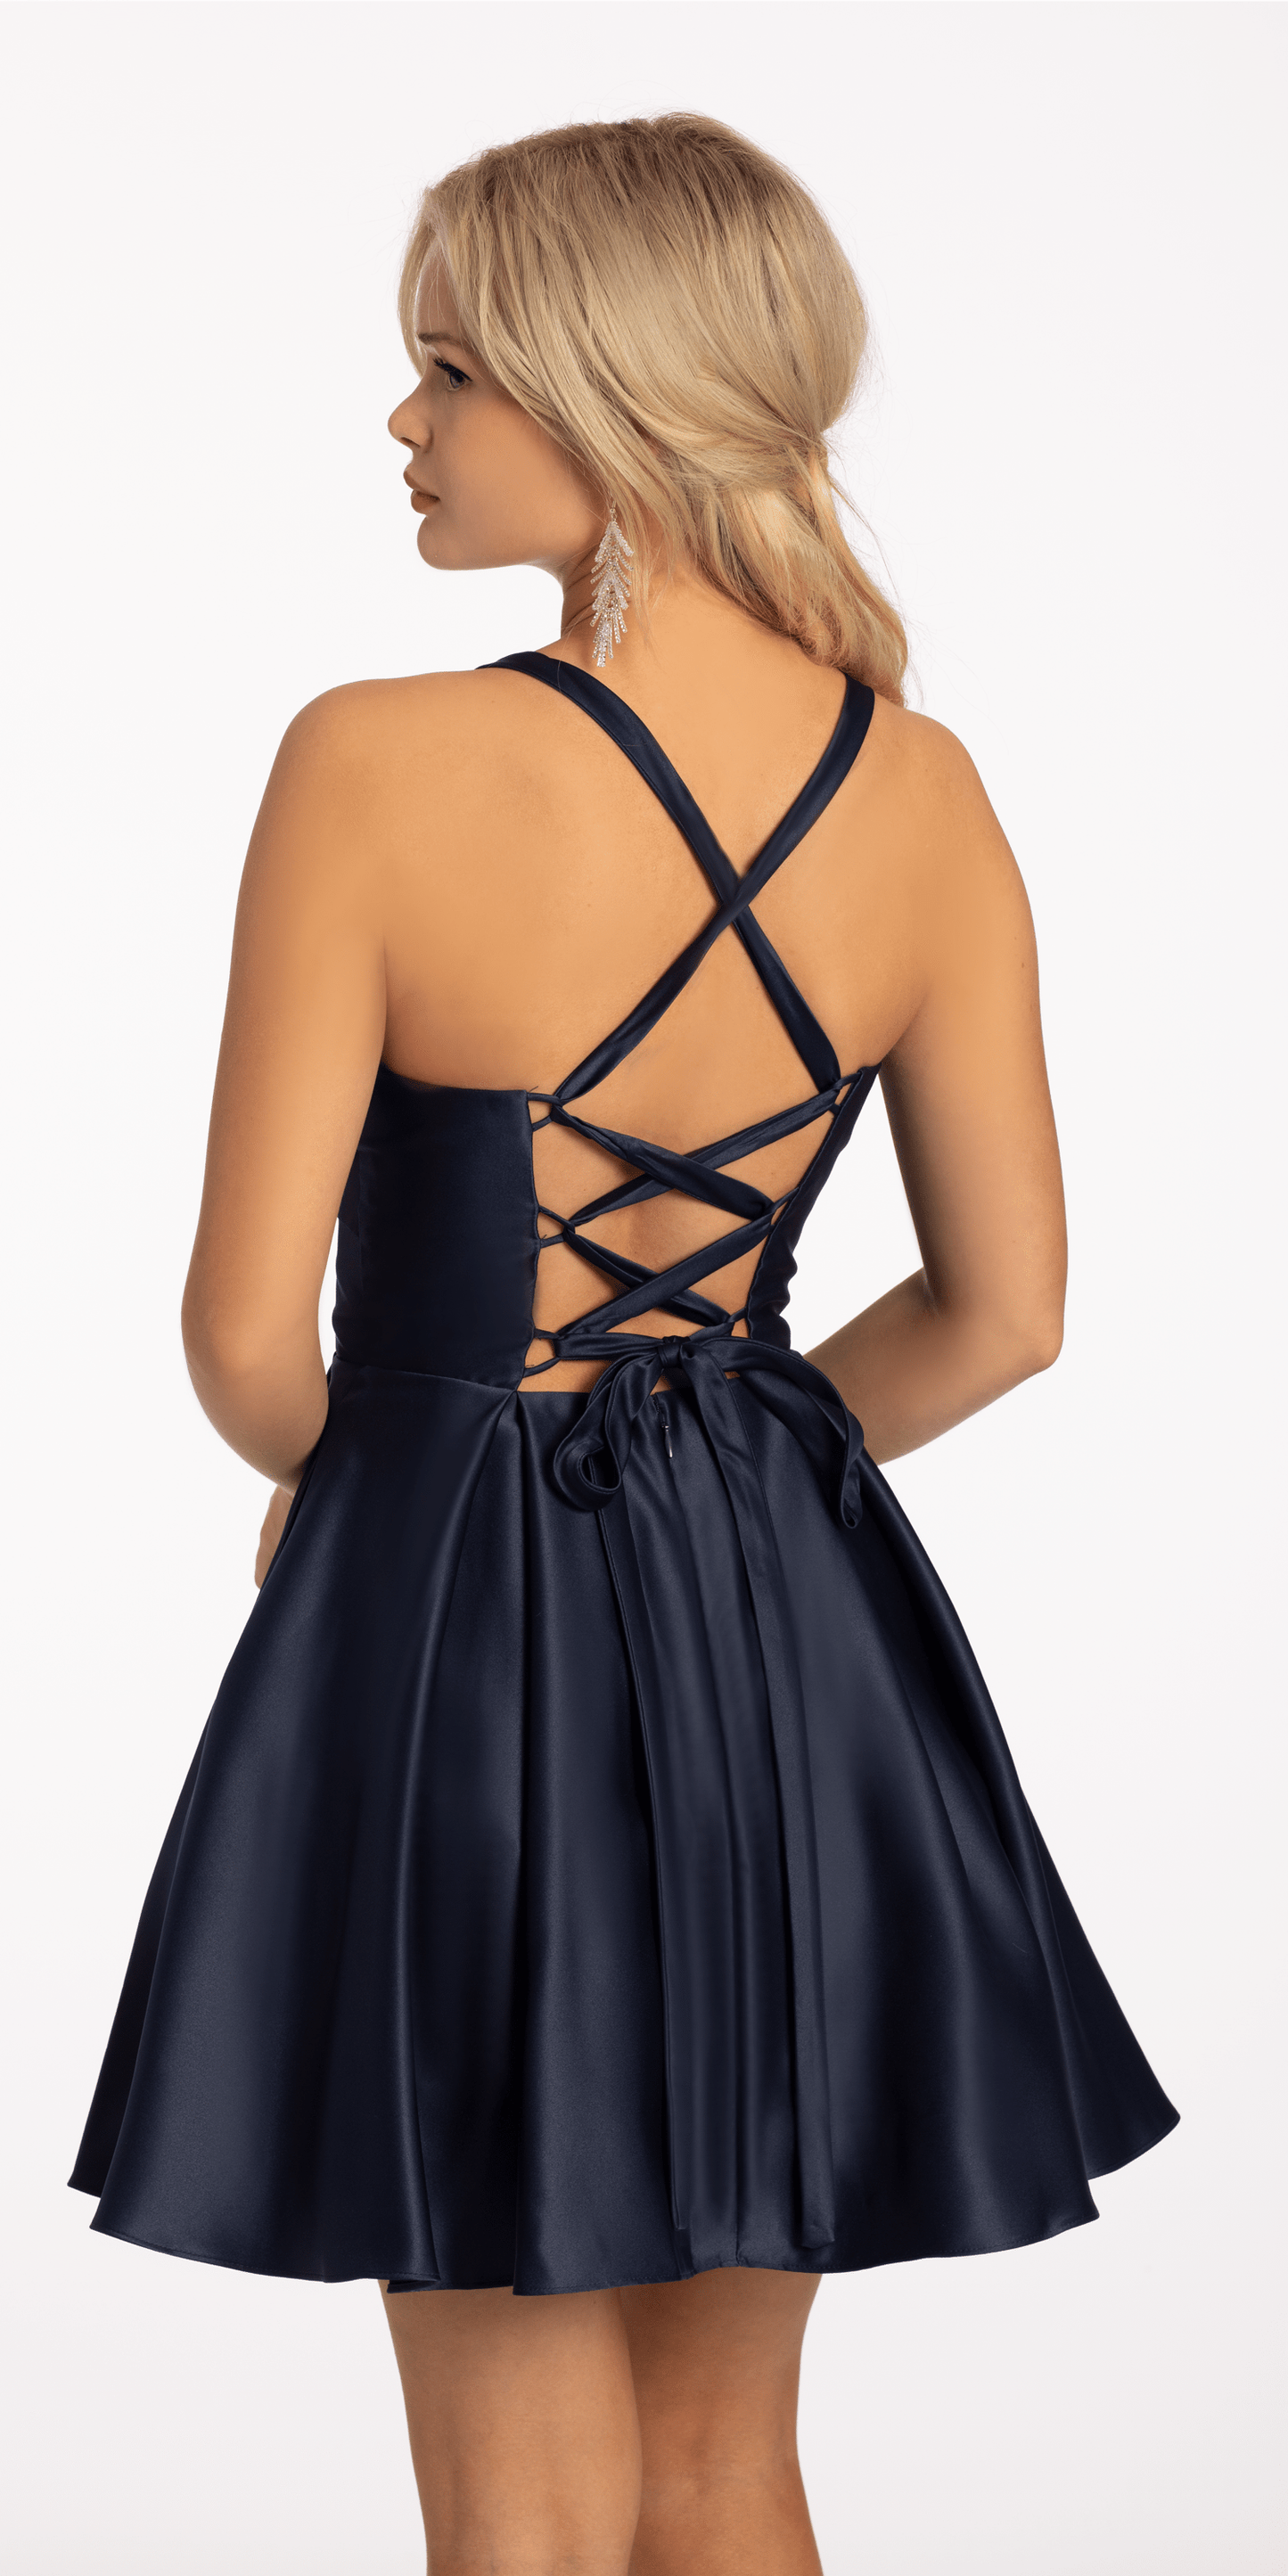 Camille La Vie Satin Pleated Lace Up Back Fit and Flare Dress